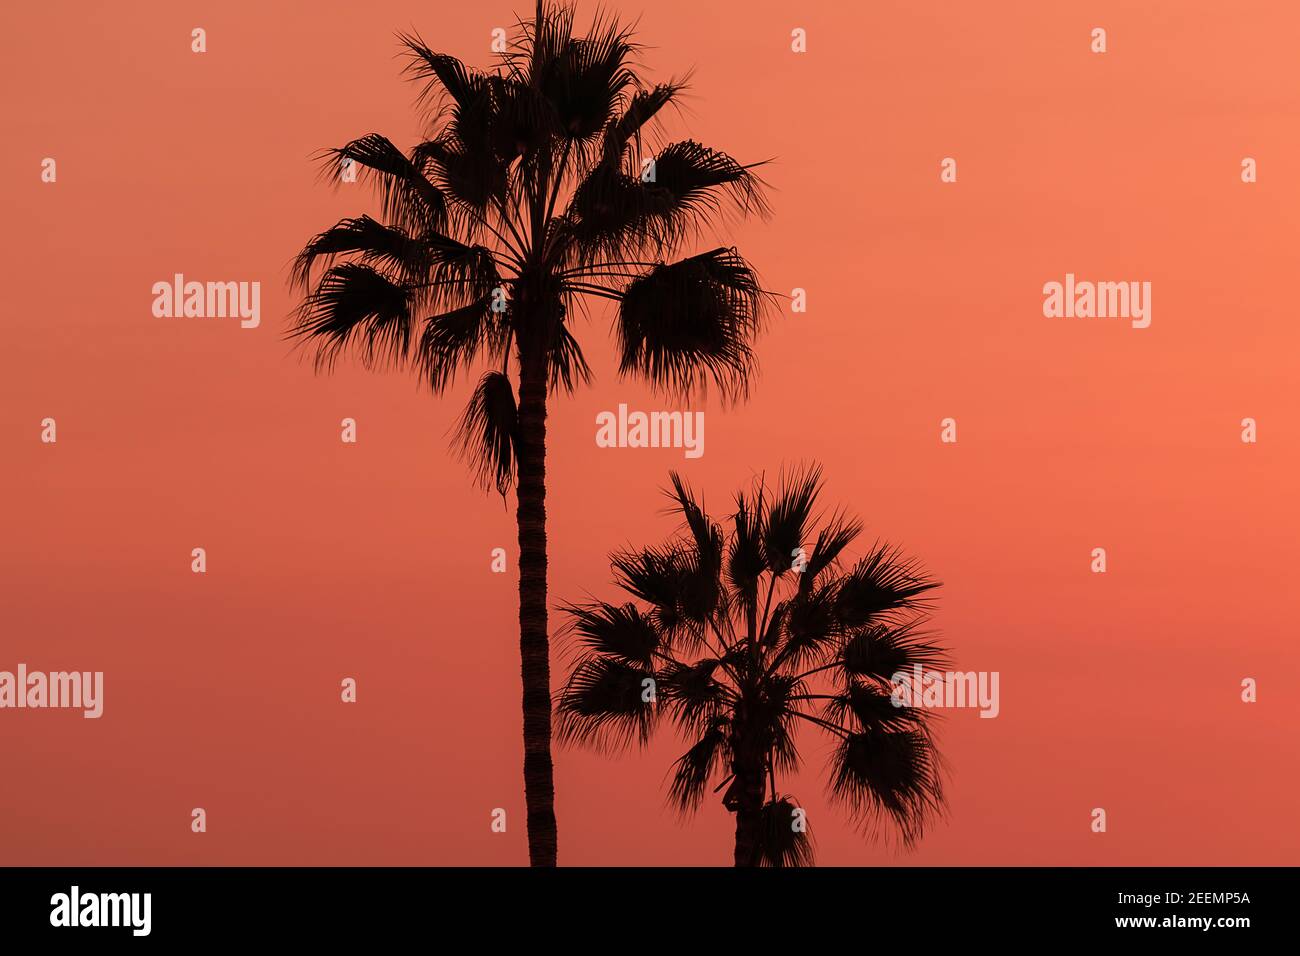 Beautiful abstract background with silhouette palm trees in sunset skies Stock Photo